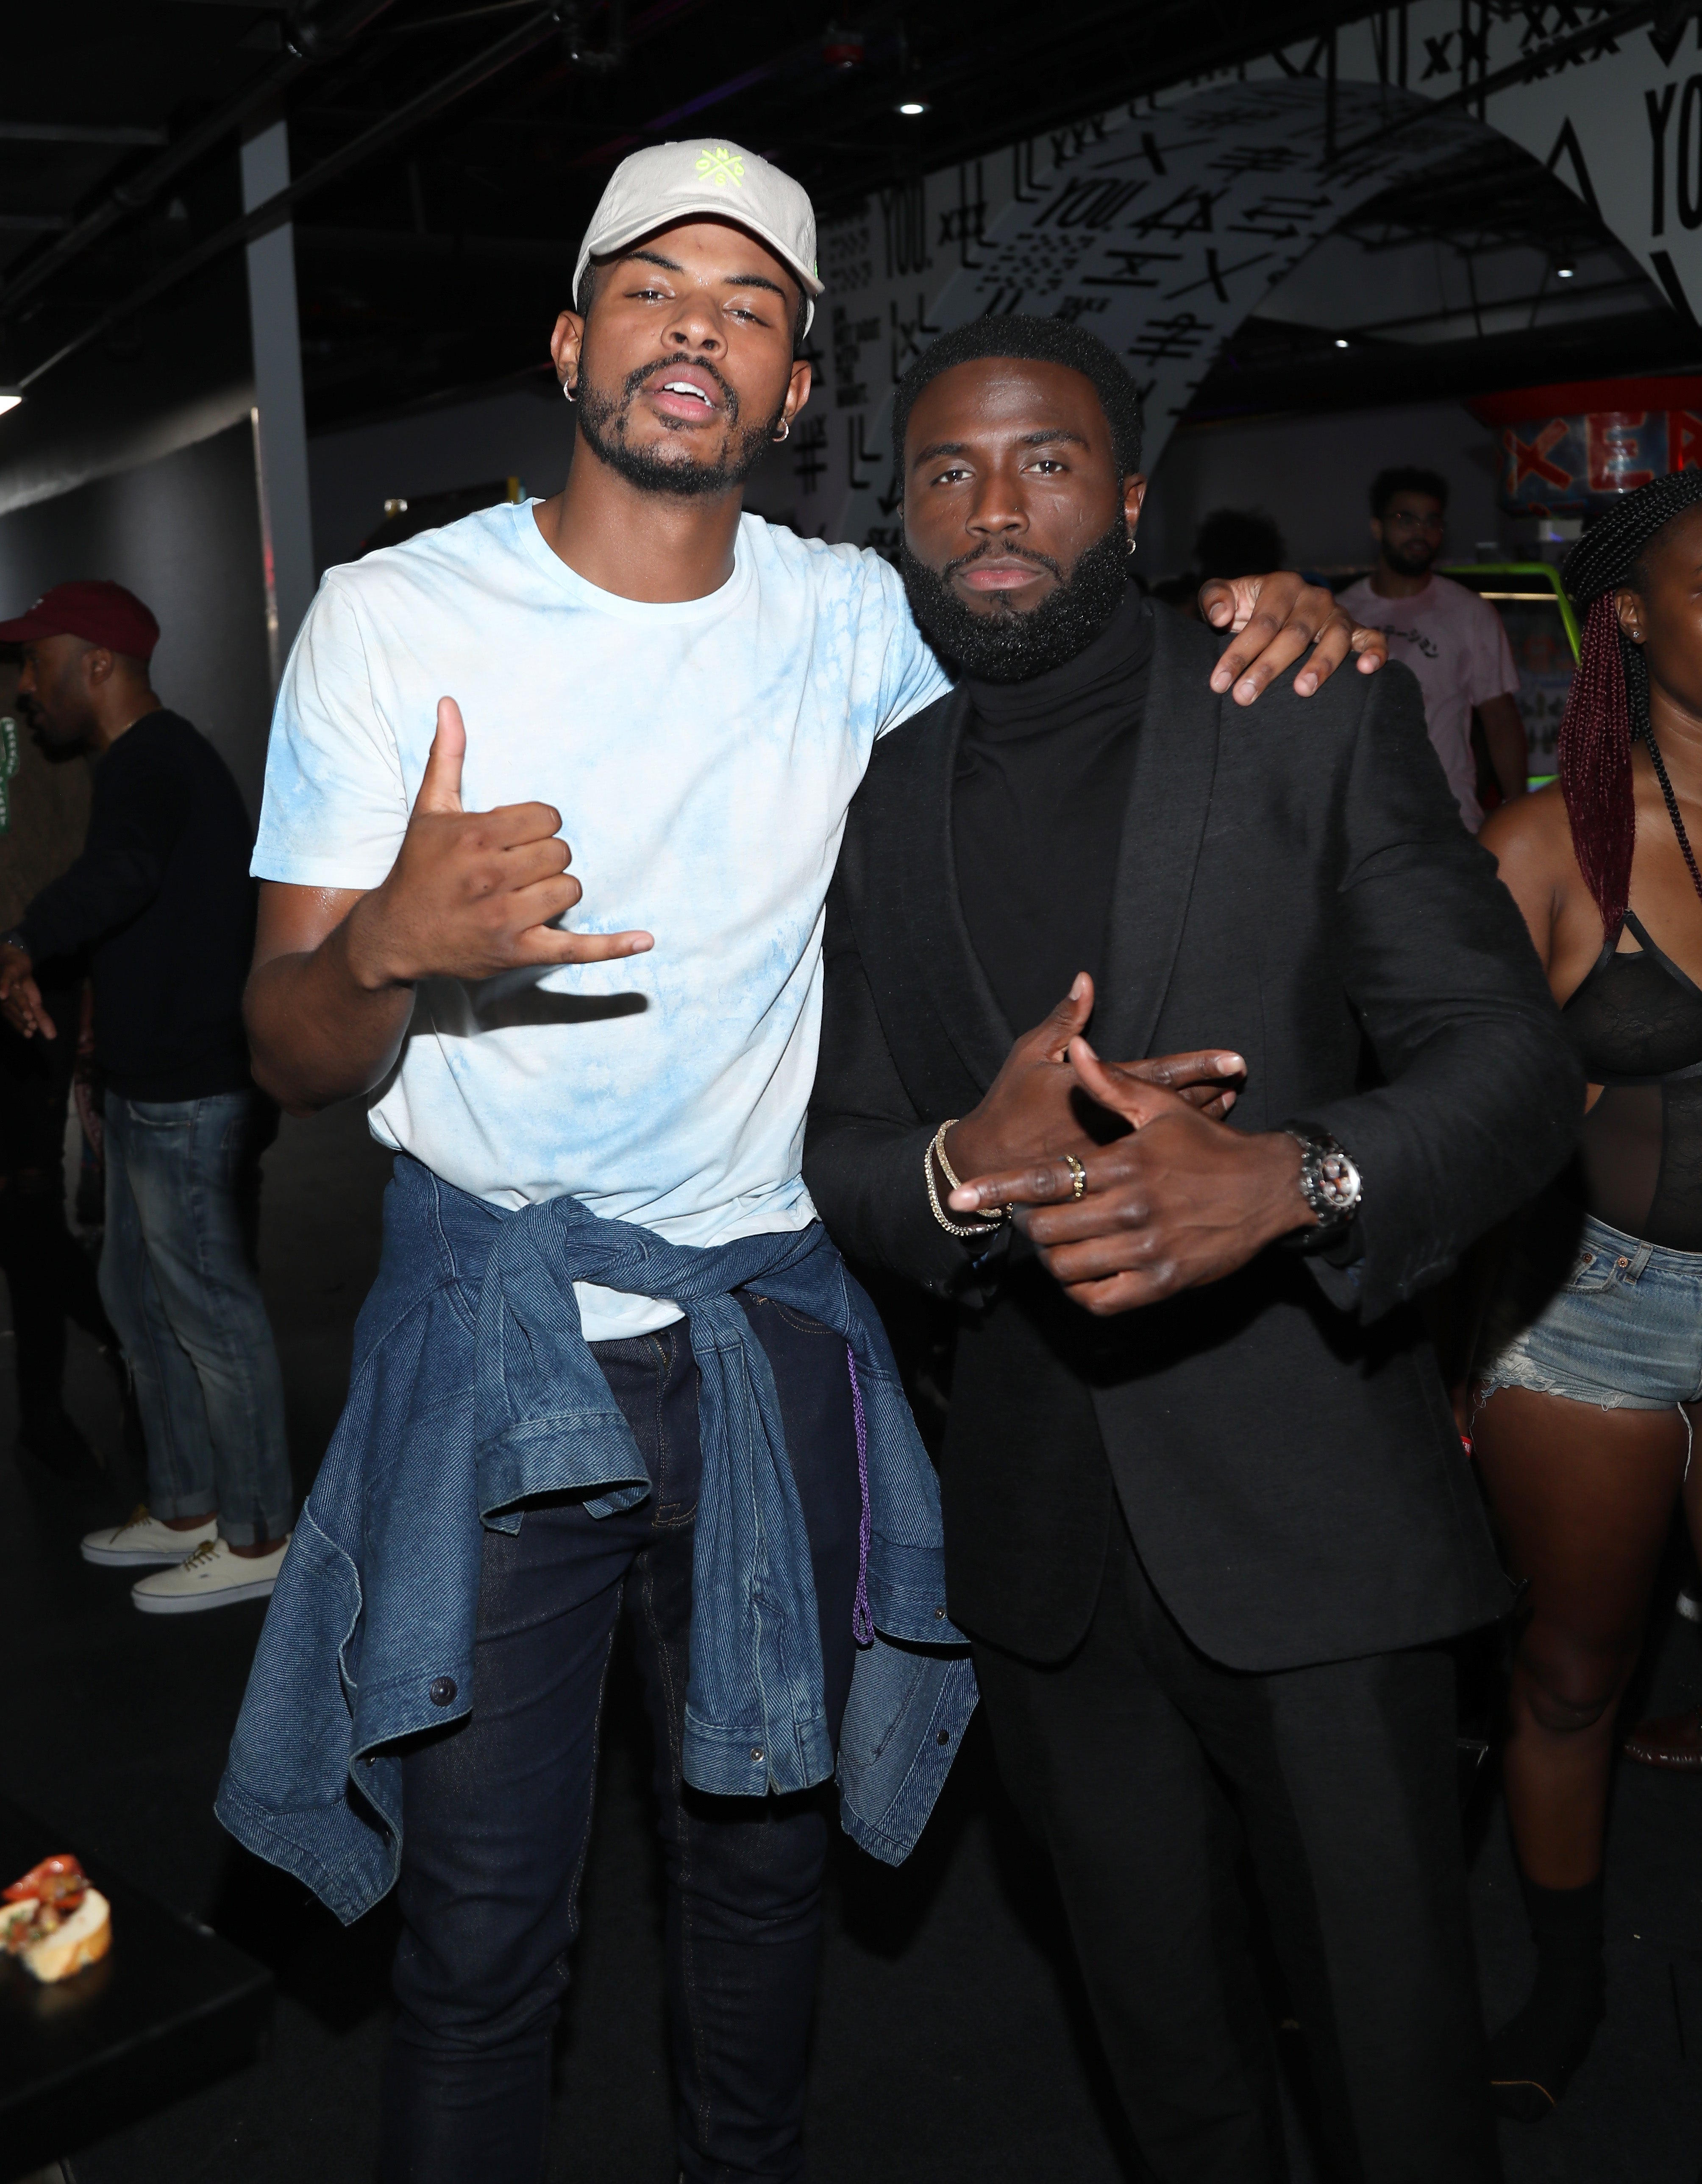 Luke James, Michelle Obama, Teyana Taylor and More Celebs Out and About
